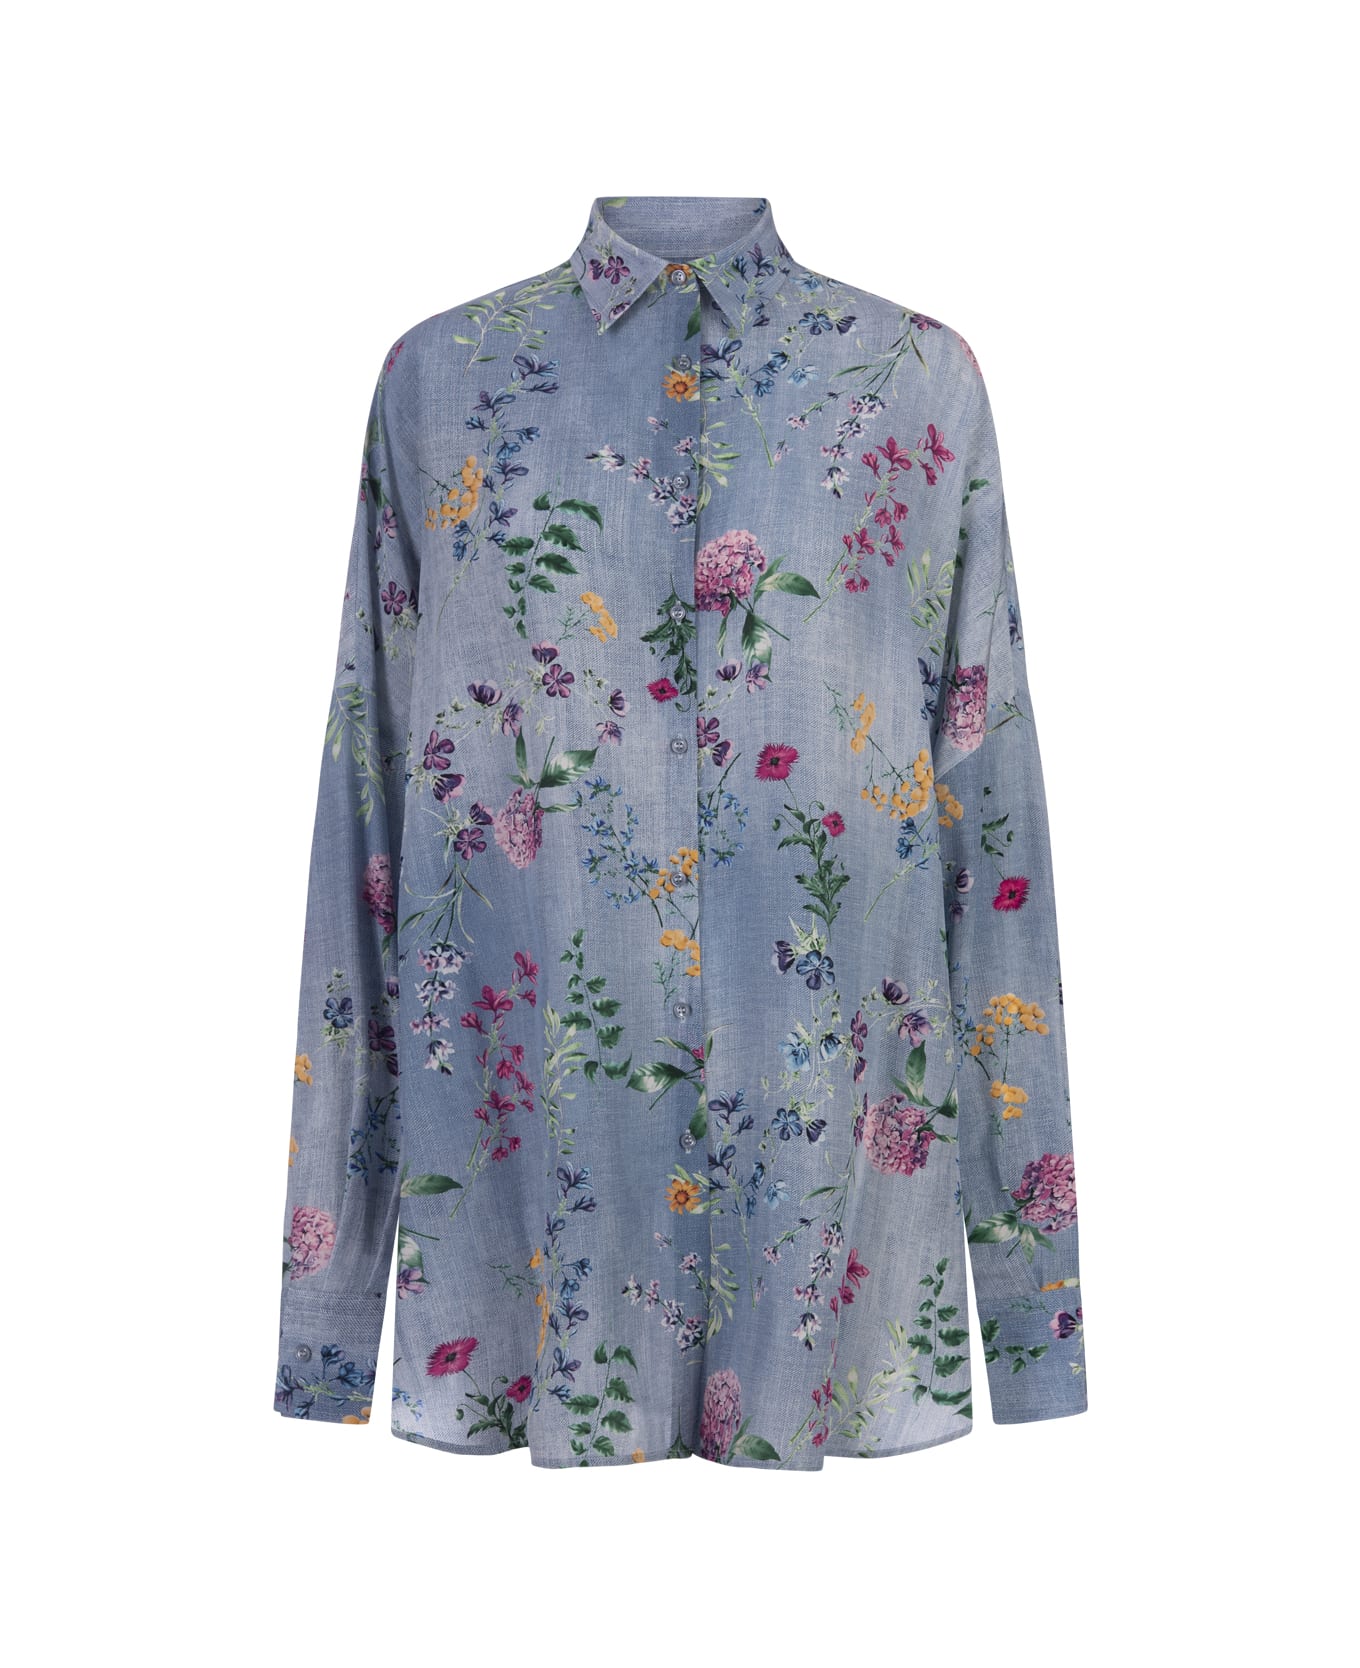 Ermanno Scervino Silk Over Shirt With Floral Print - Blue